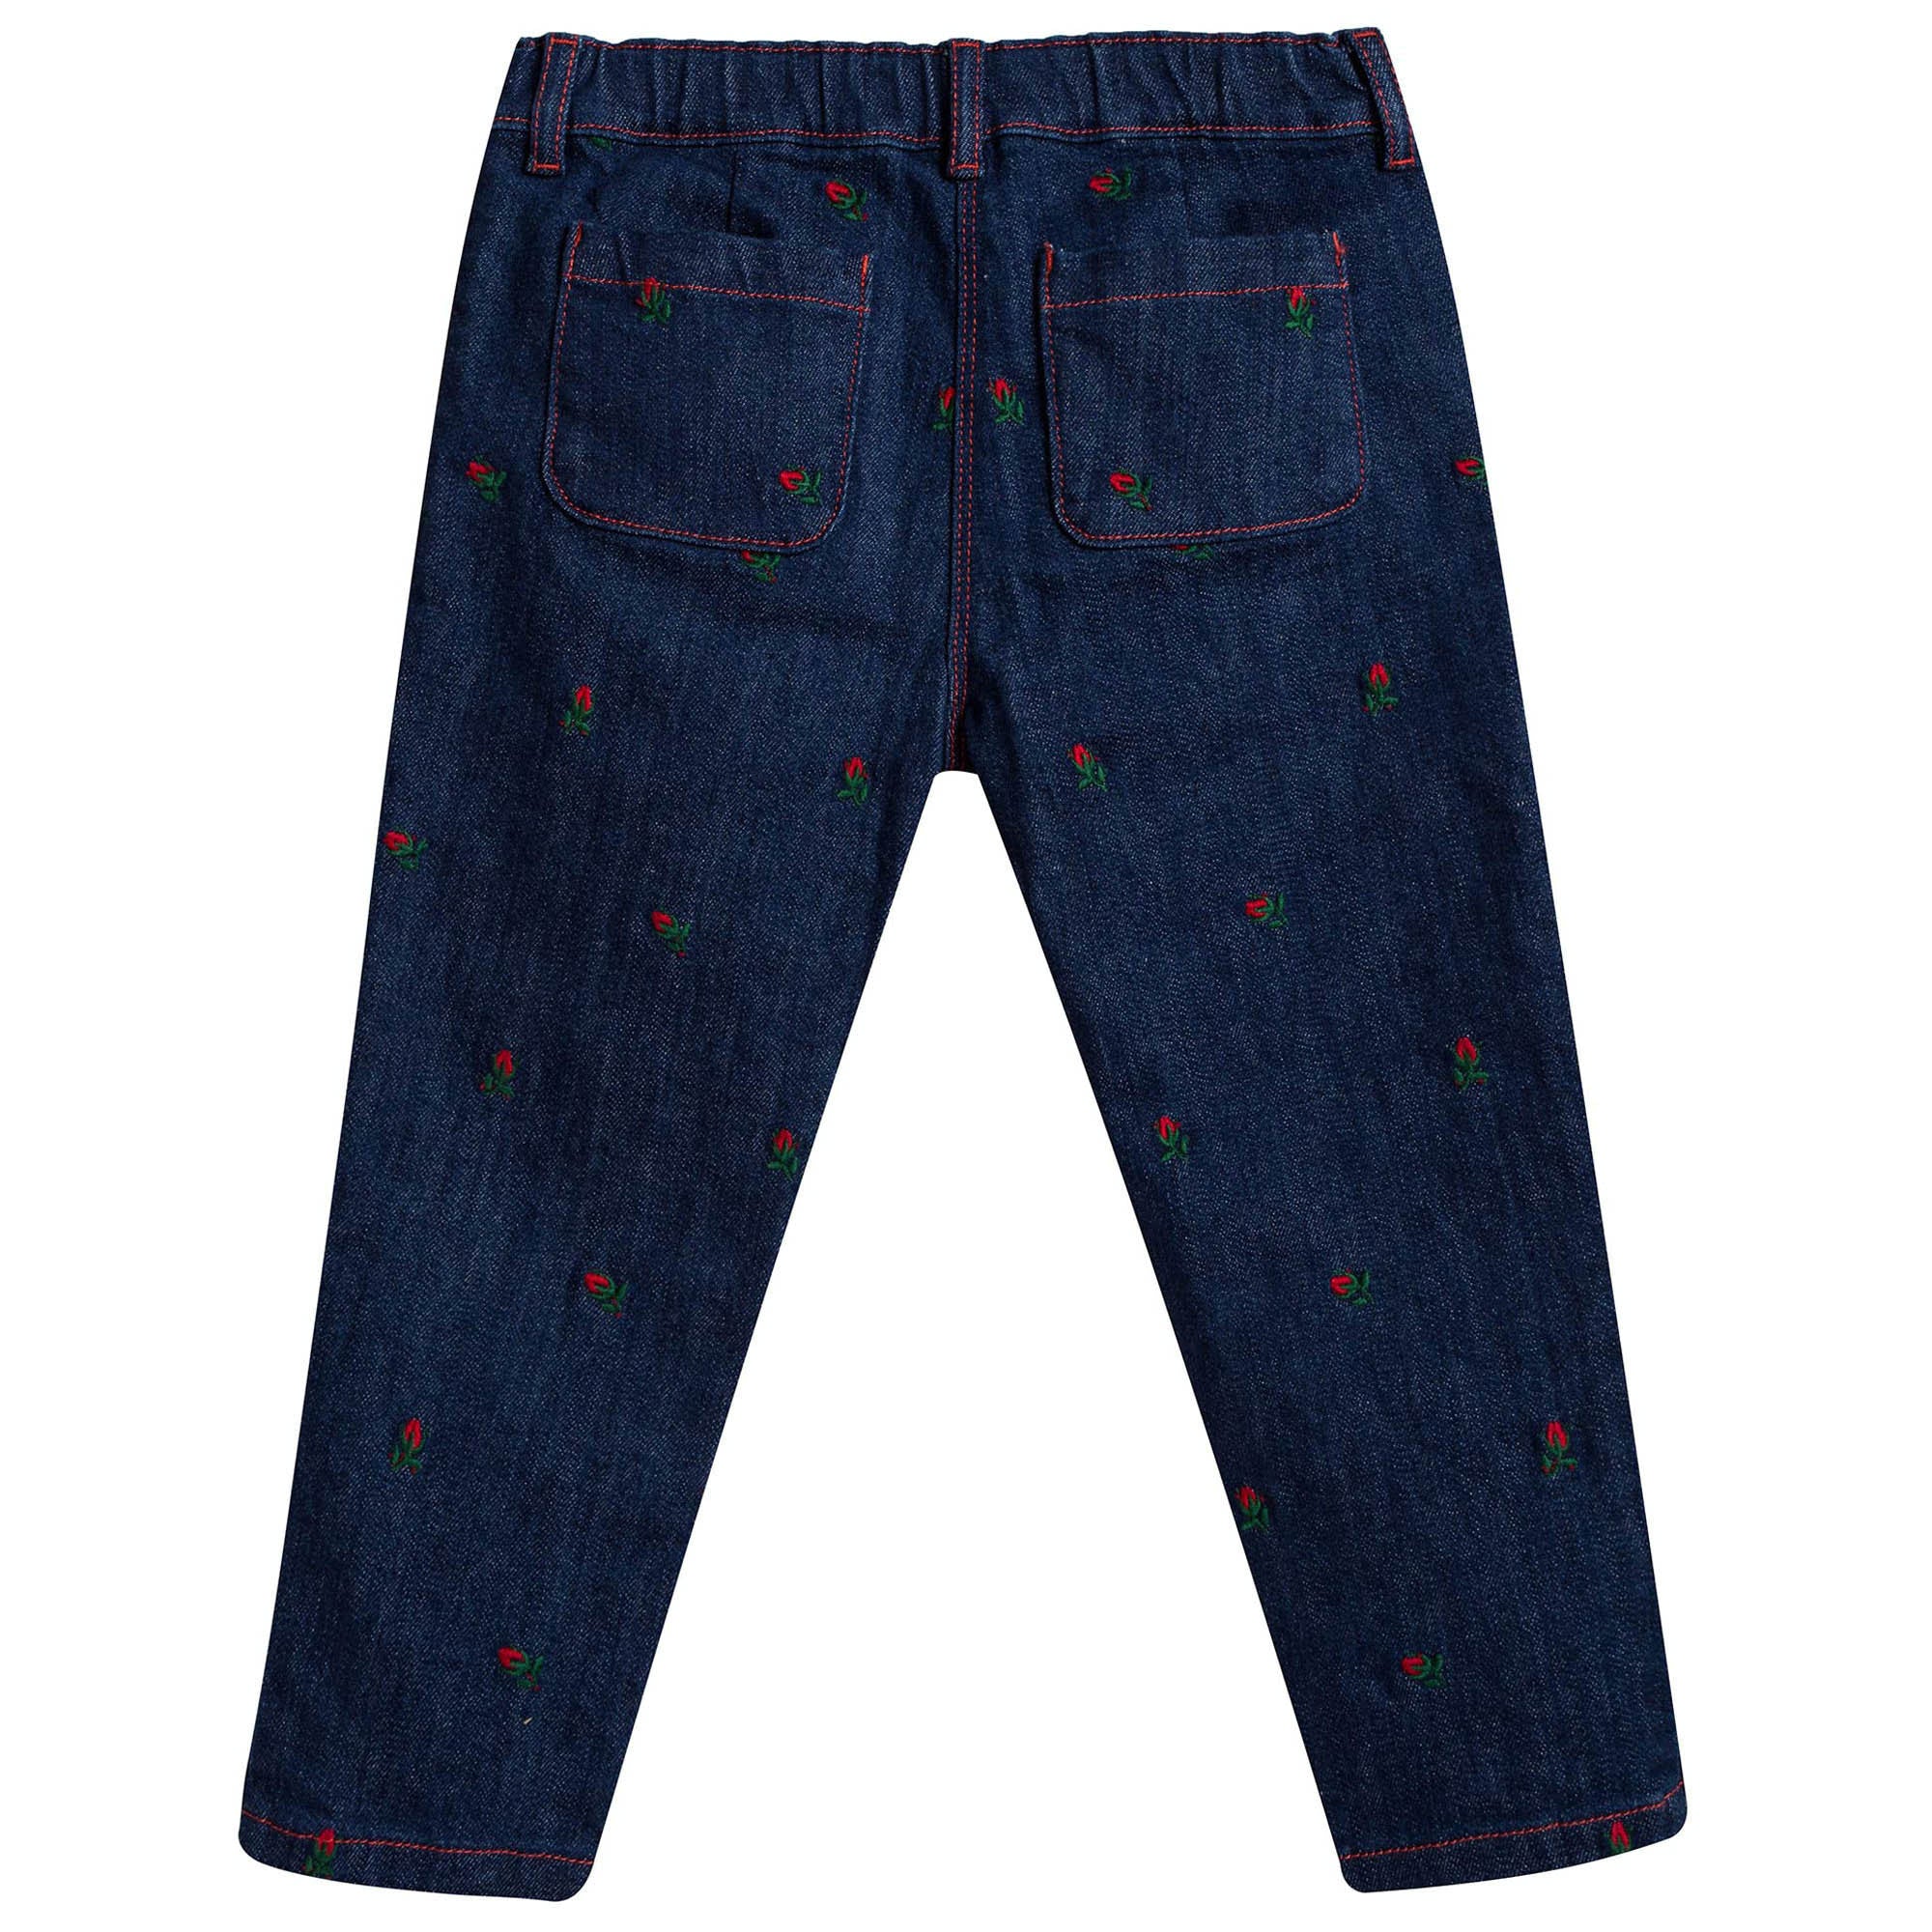 Baby Girls Blue Denim Jeans With Red Embroidered Flower Trims - CÉMAROSE | Children's Fashion Store - 2